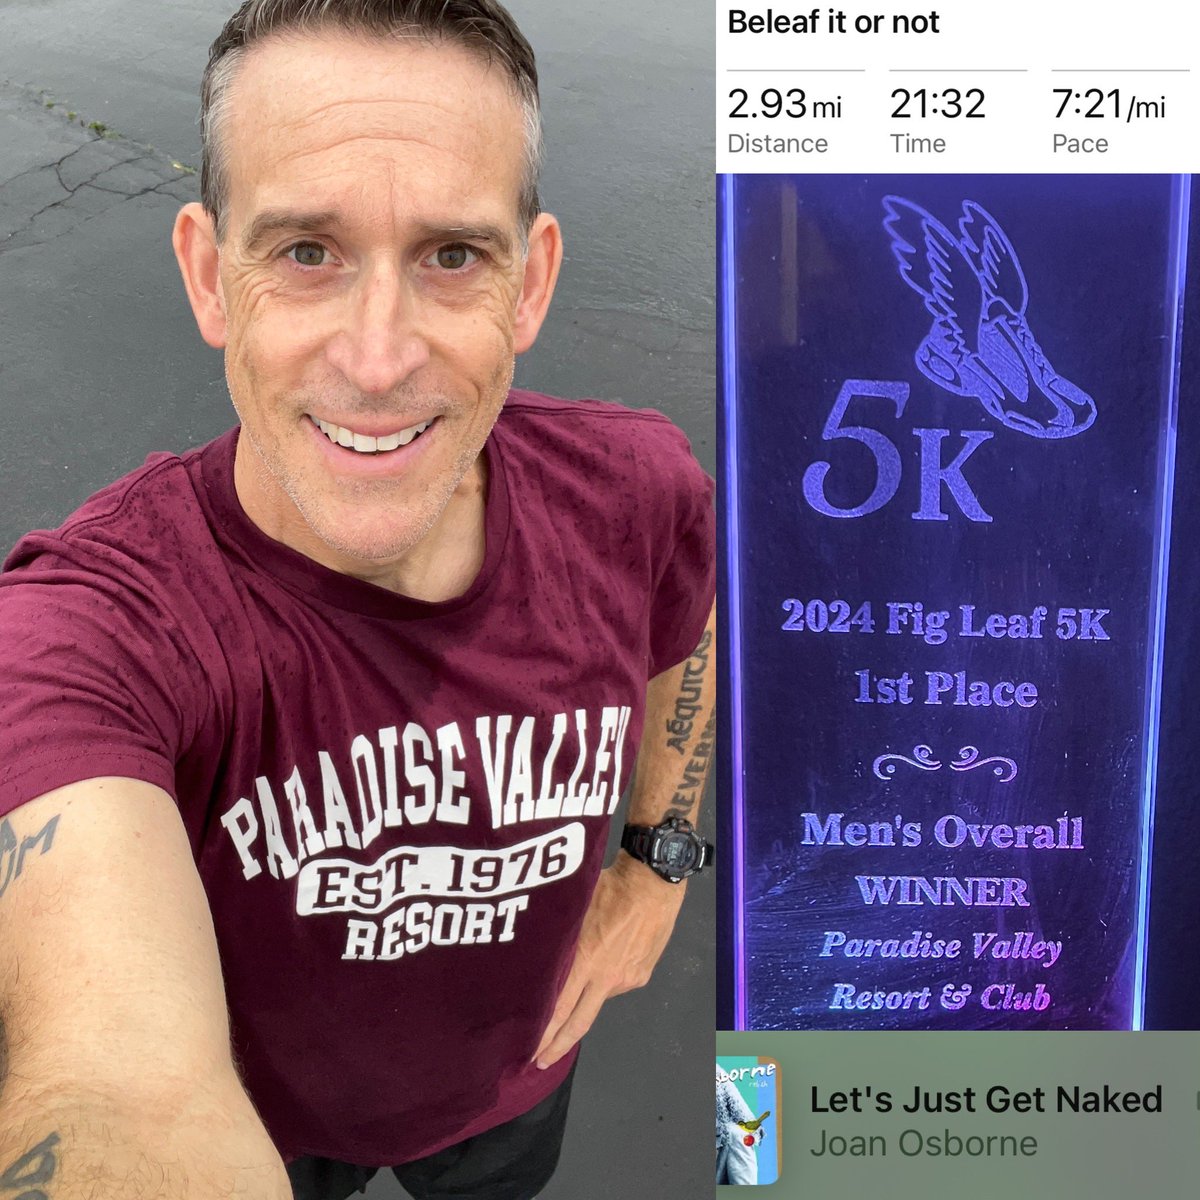 Something I haven’t done in a long time, overall winner at a 5k over the weekend. It was a bit short, but it was cool out. And wow that course had some hills. #5k #running #figleaf5k